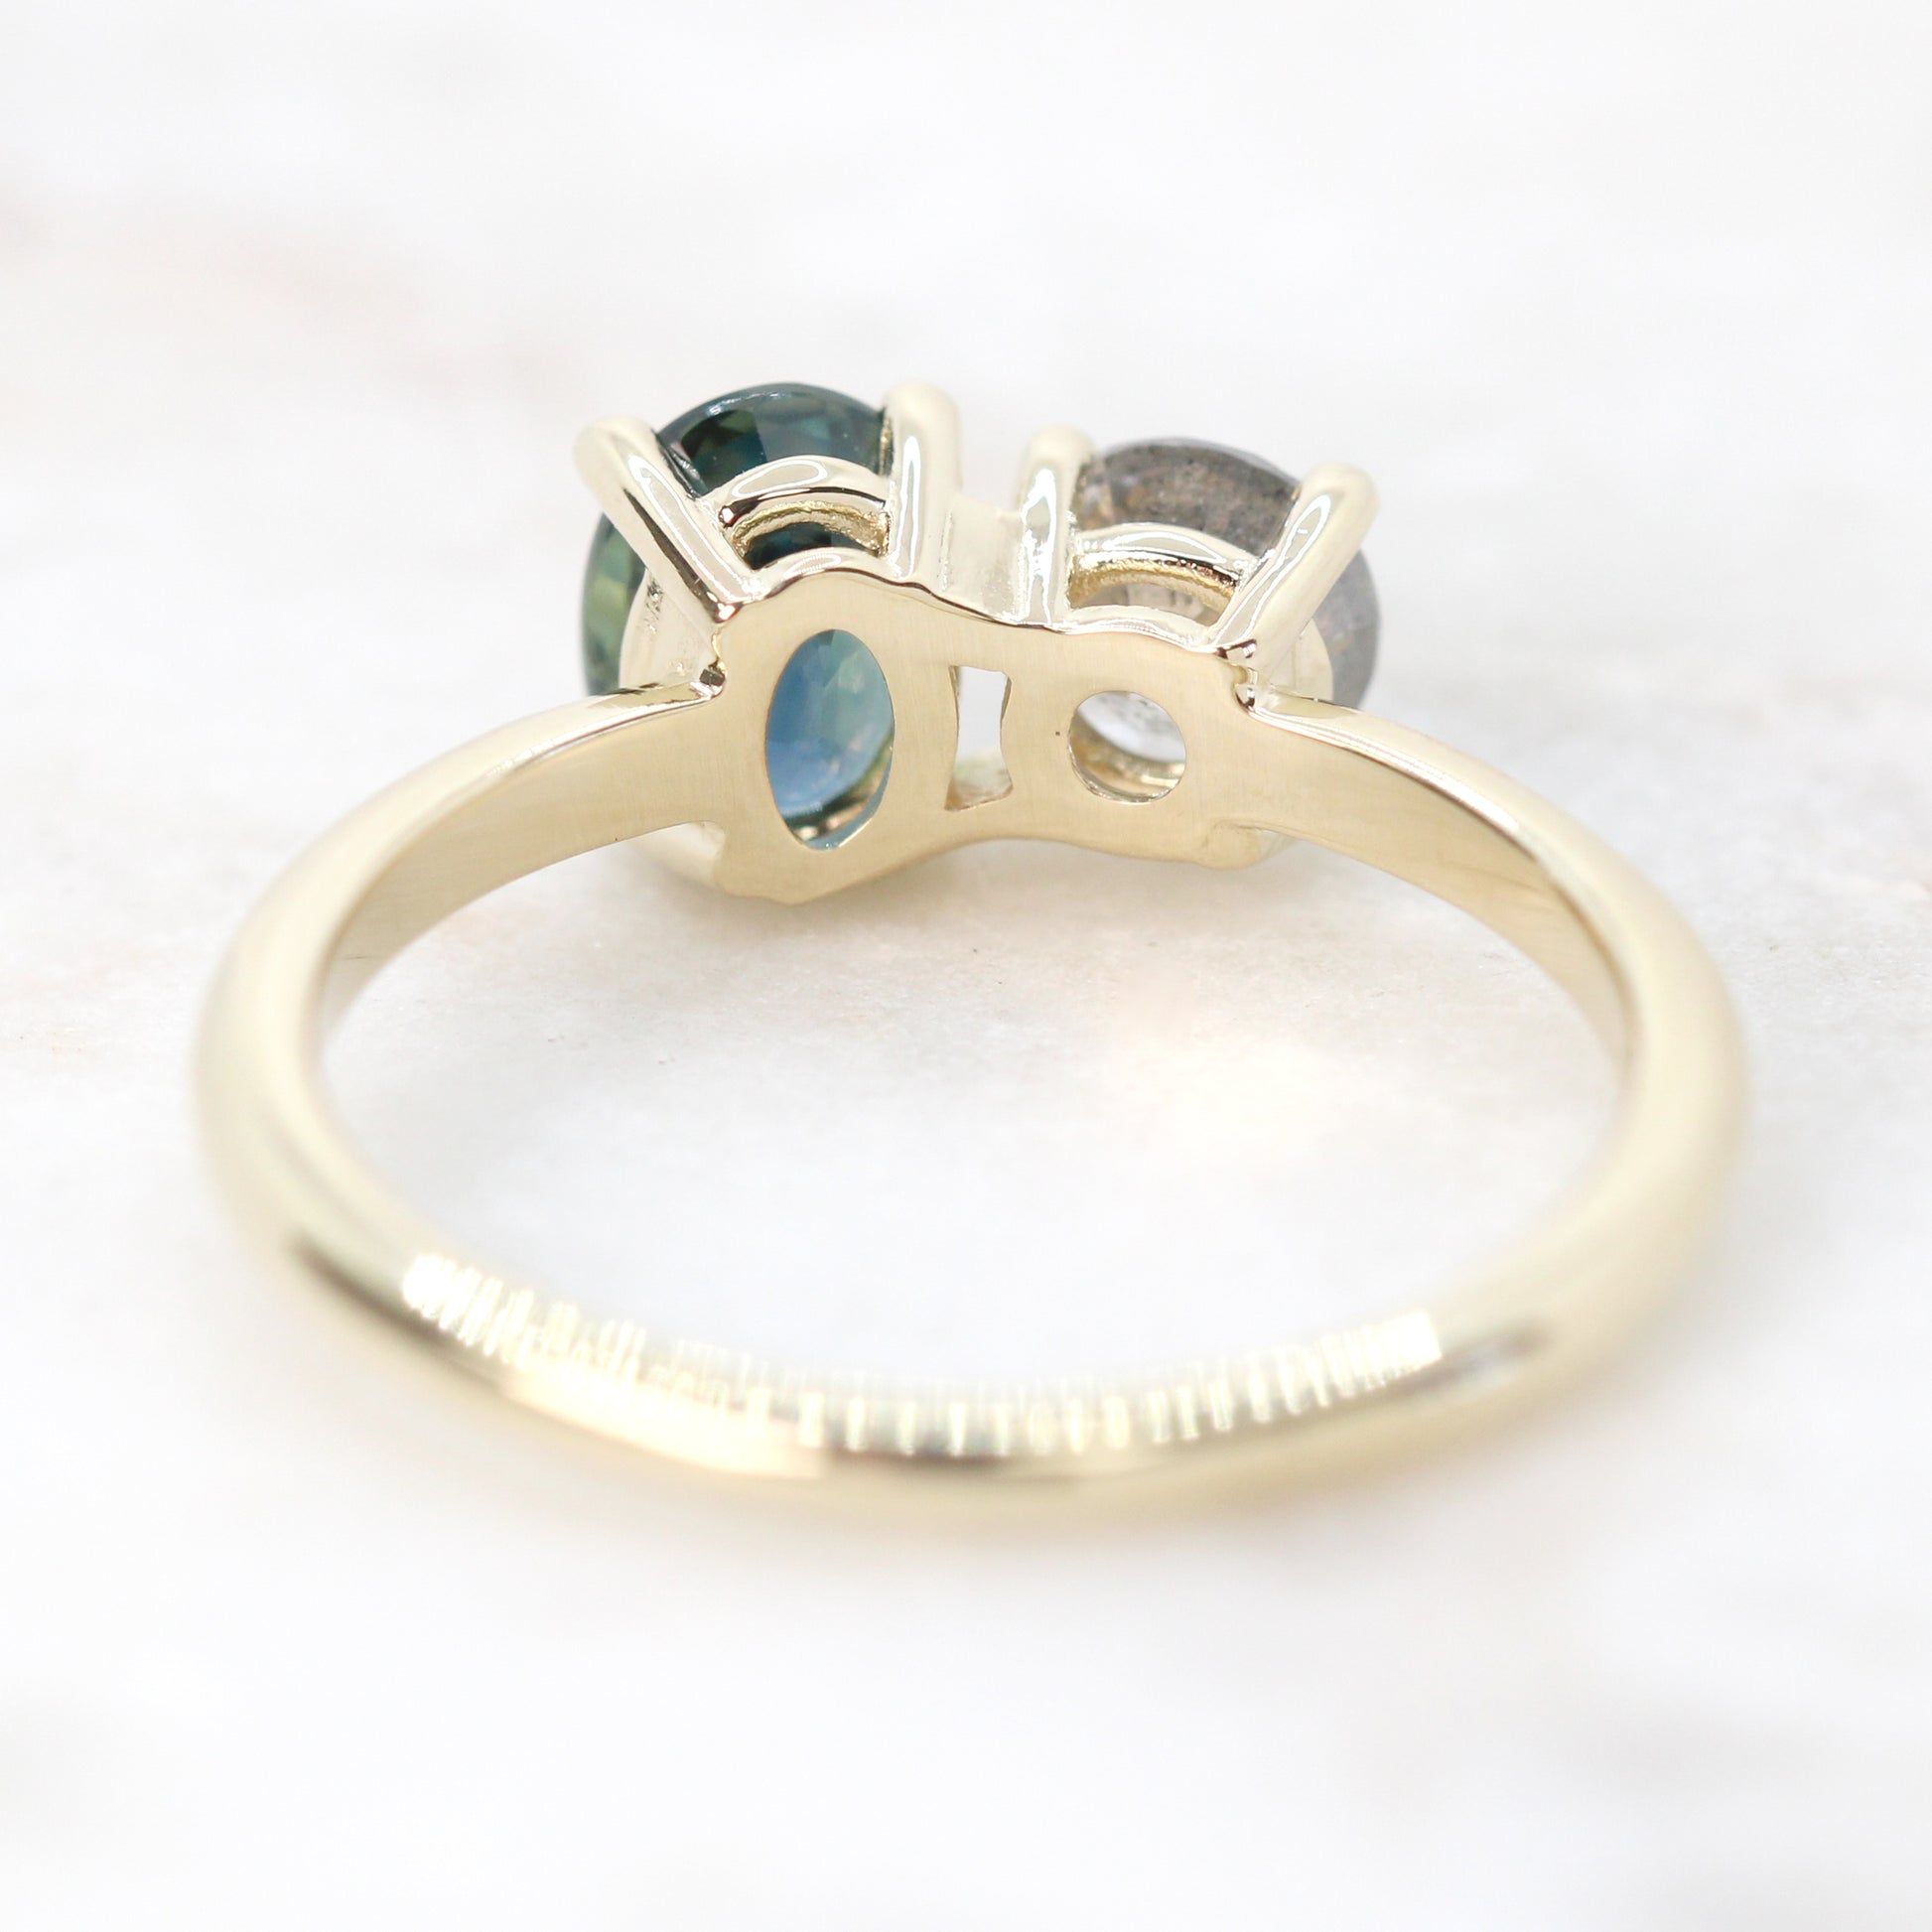 Toi et Moi Ring with a 0.58 Light Gray Round Celestial Diamond and a 1.11 Carat Teal Blue Oval Sapphire in 14k Yellow Gold - Ready to Size and Ship - Midwinter Co. Alternative Bridal Rings and Modern Fine Jewelry